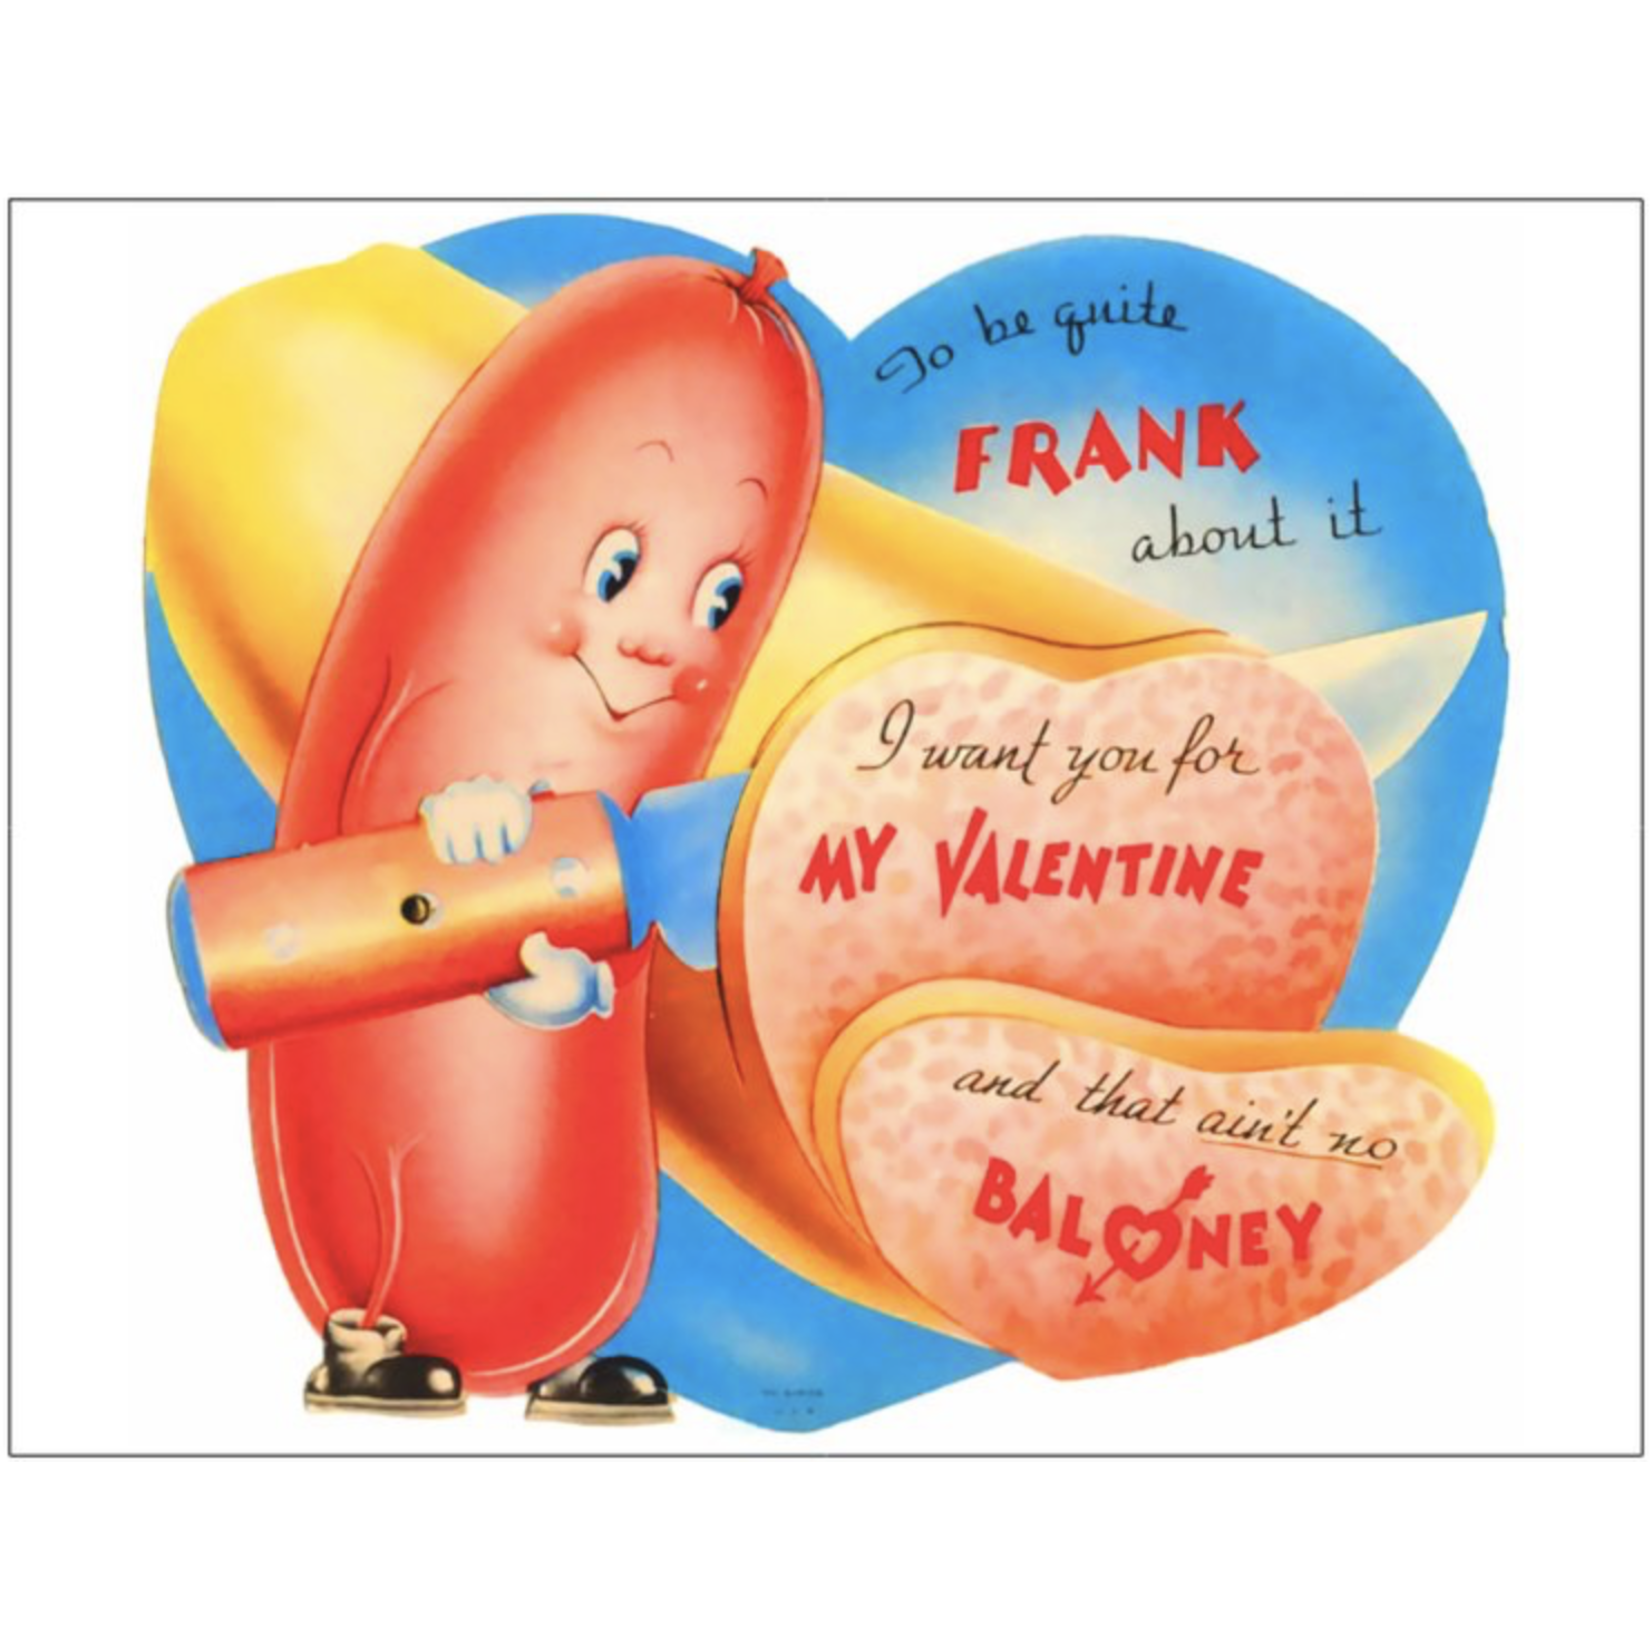 Bad Annie’s Valentine - Be Frank About It